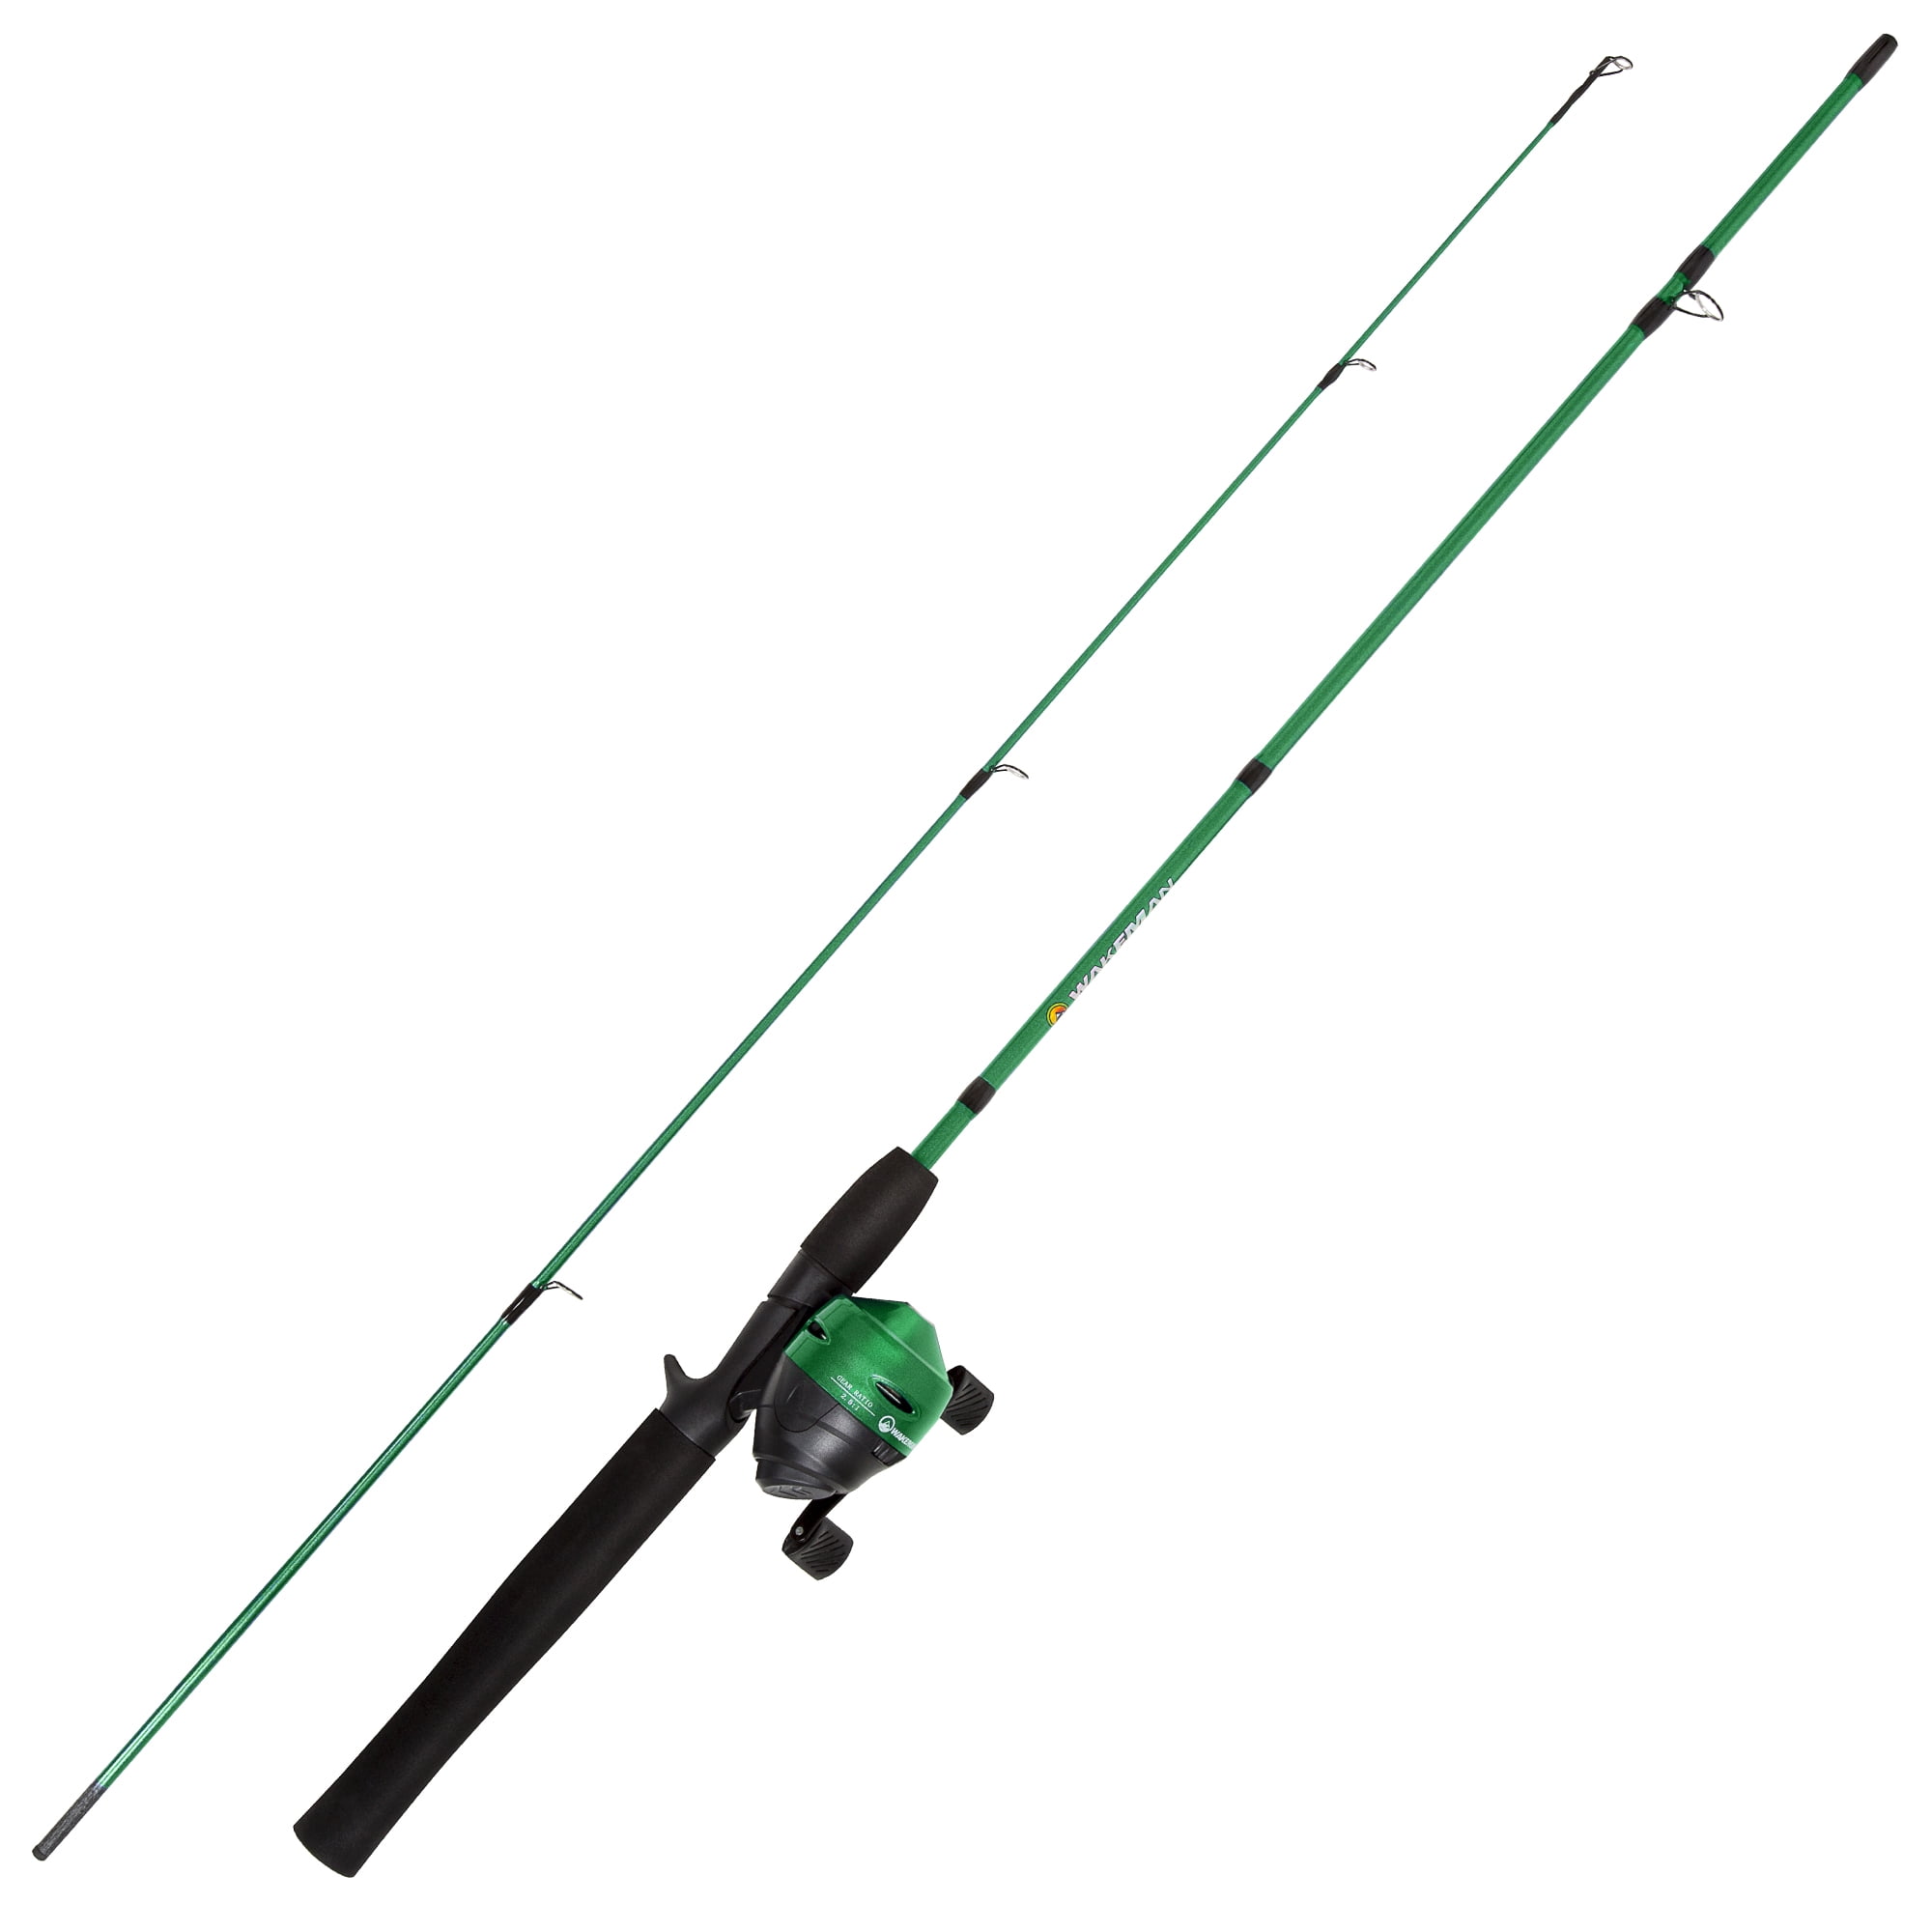 Fishing Pole – 64-Inch Fiberglass and Stainless Steel Rod and Pre-Spooled  Reel Combo for Lake, Pond and Stream Casting by Wakeman Outdoors (Blue;